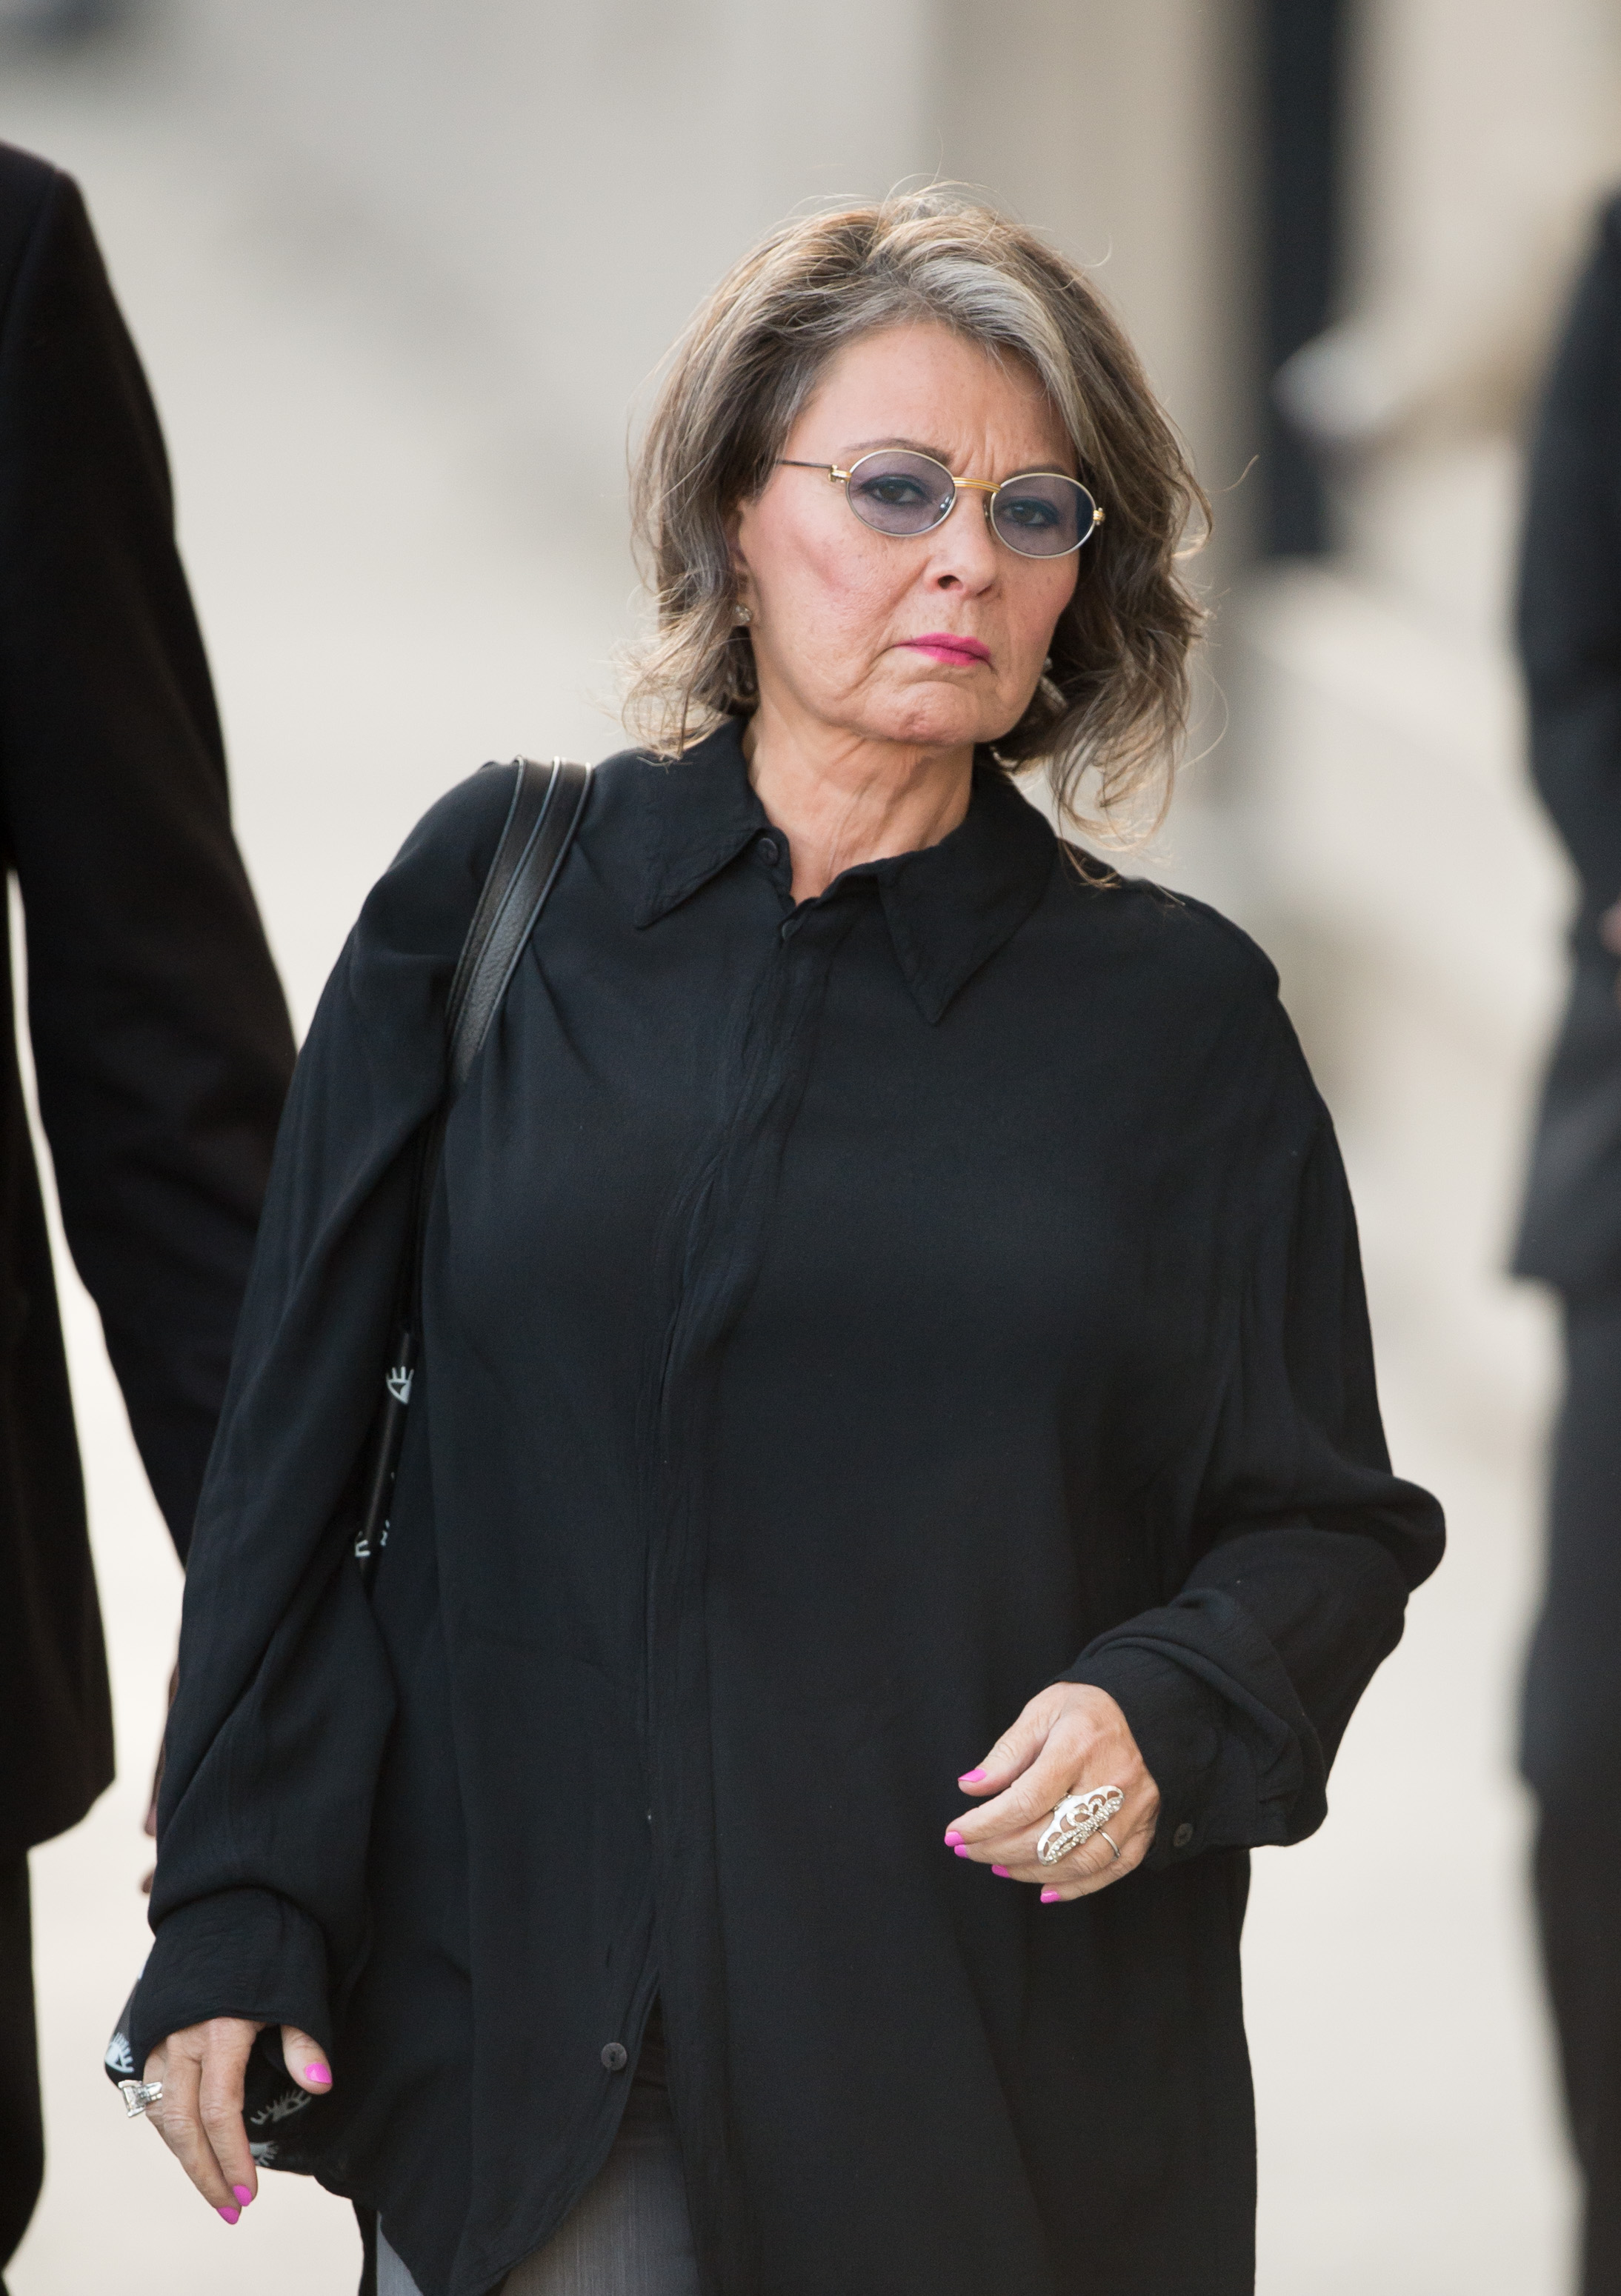 Roseanne Barr is seen in Hollywood on June 24, 2014 in Los Angeles, California. (RB/Bauer-Griffin&amp;mdash;GC Images/Getty Images)